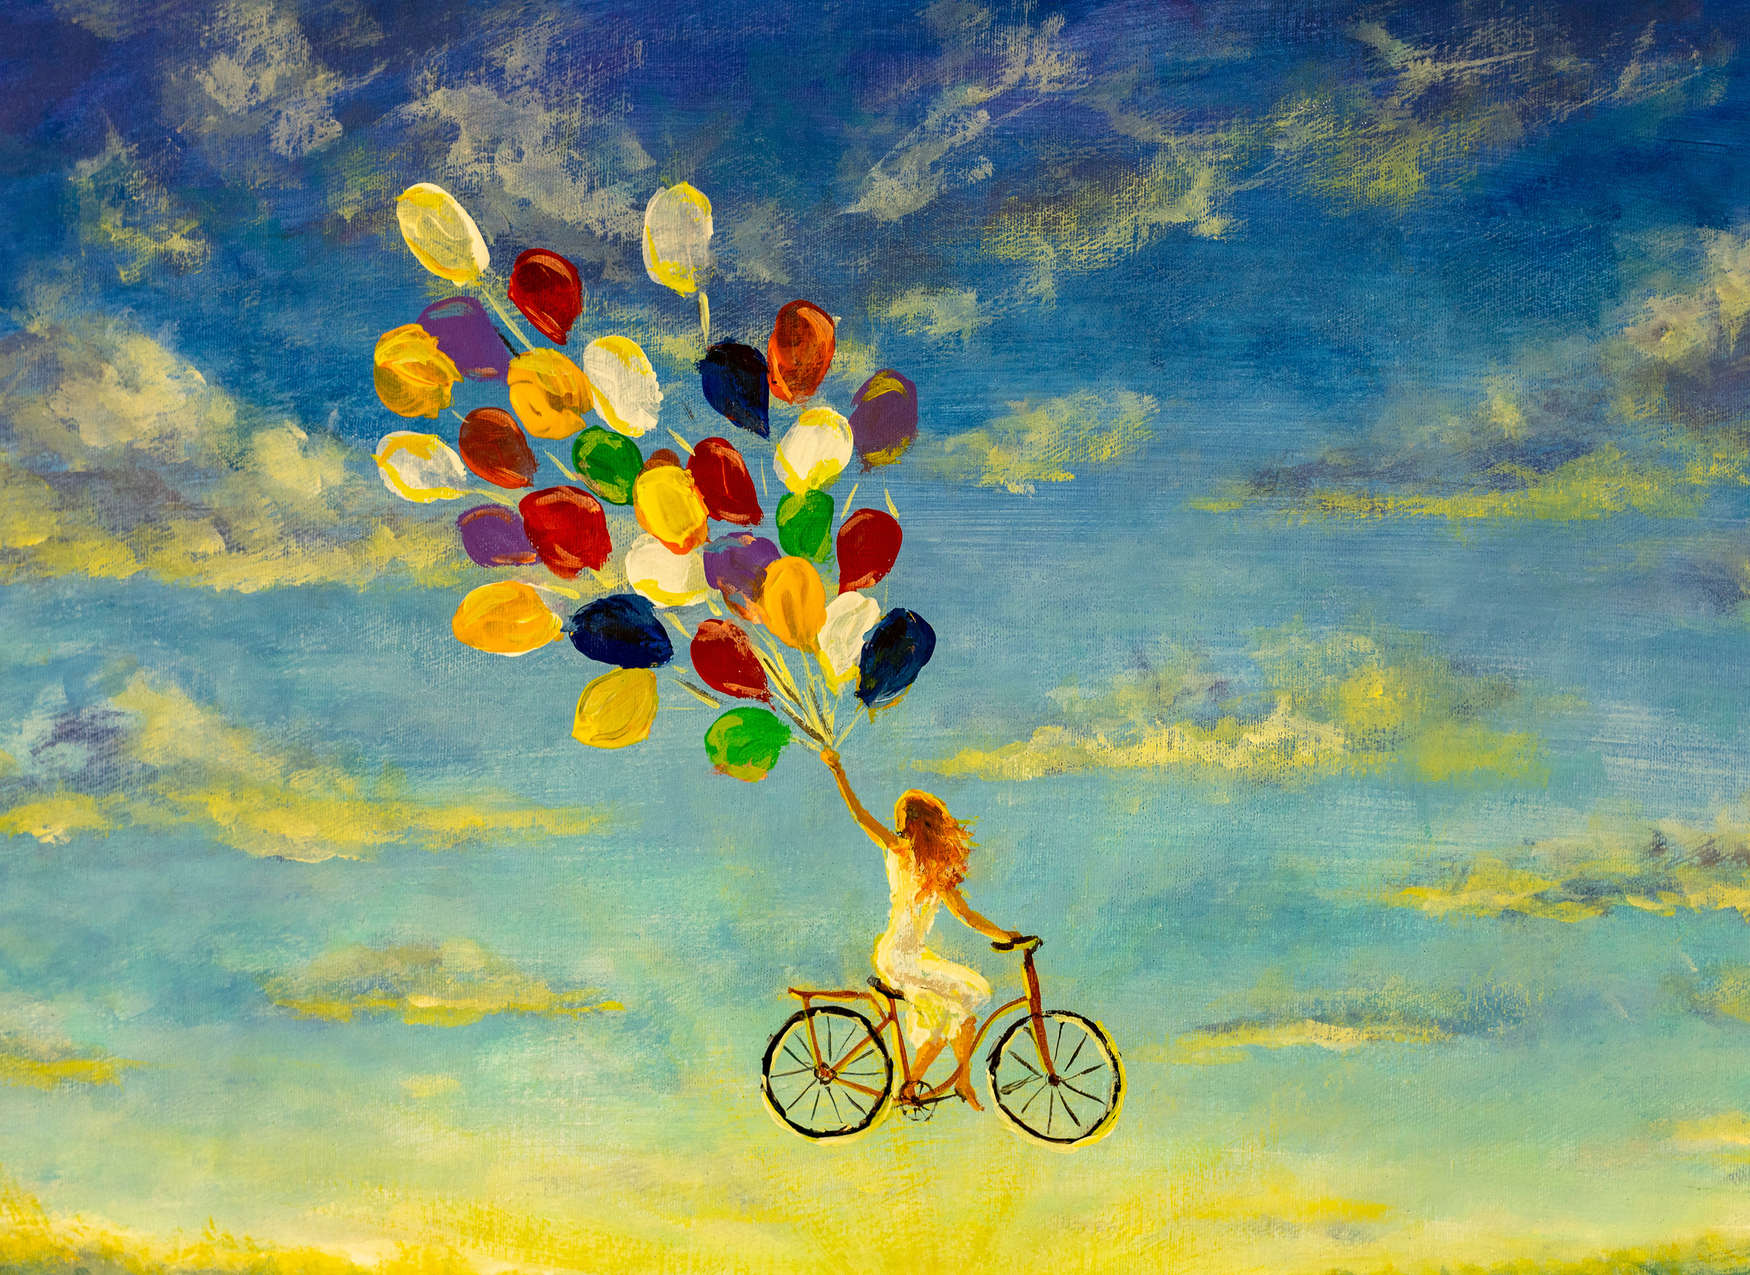             Photo wallpaper with Woman on Bicycle in the Sky Painting - Blue, Yellow, Colourful
        